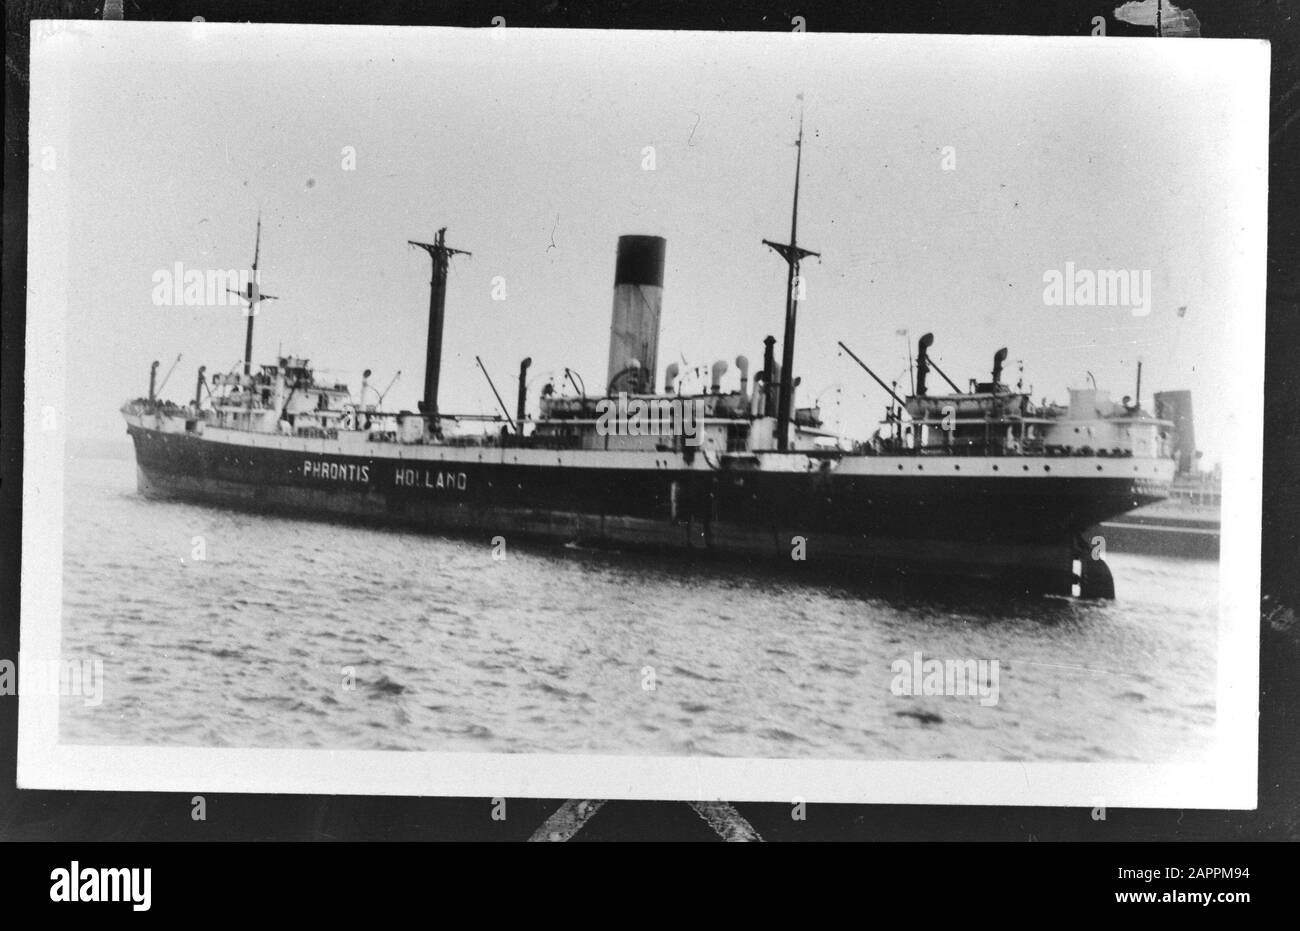 MN [Merchant Navy]/Anefo London series  Dutch merchant fleet. S.S. Phrontis Annotation: Repronegative. Built 1926 at the Caledon Shipyard, Dundee with the dimensions 136,85 x 16,66 x 8,87m, measured 6,181 GRT and 7,820 DWT. The 4,800 rhp allowed a speed of 13.5 knots. Call signs PQFR/PGSU. In 1958 sold to Djeddah and renamed and seemately renamed Ryad and the same year broken up at Hong Kong. She was owned by the Ned. Steam trip Me Ocean at Amsterdam. [source: warshipsresearch.web-log.nl/warships/2010/12/dutch-steam-ship-phrontis.html] Date: 1943 Location: Great Britain Keywords: merchant flee Stock Photo